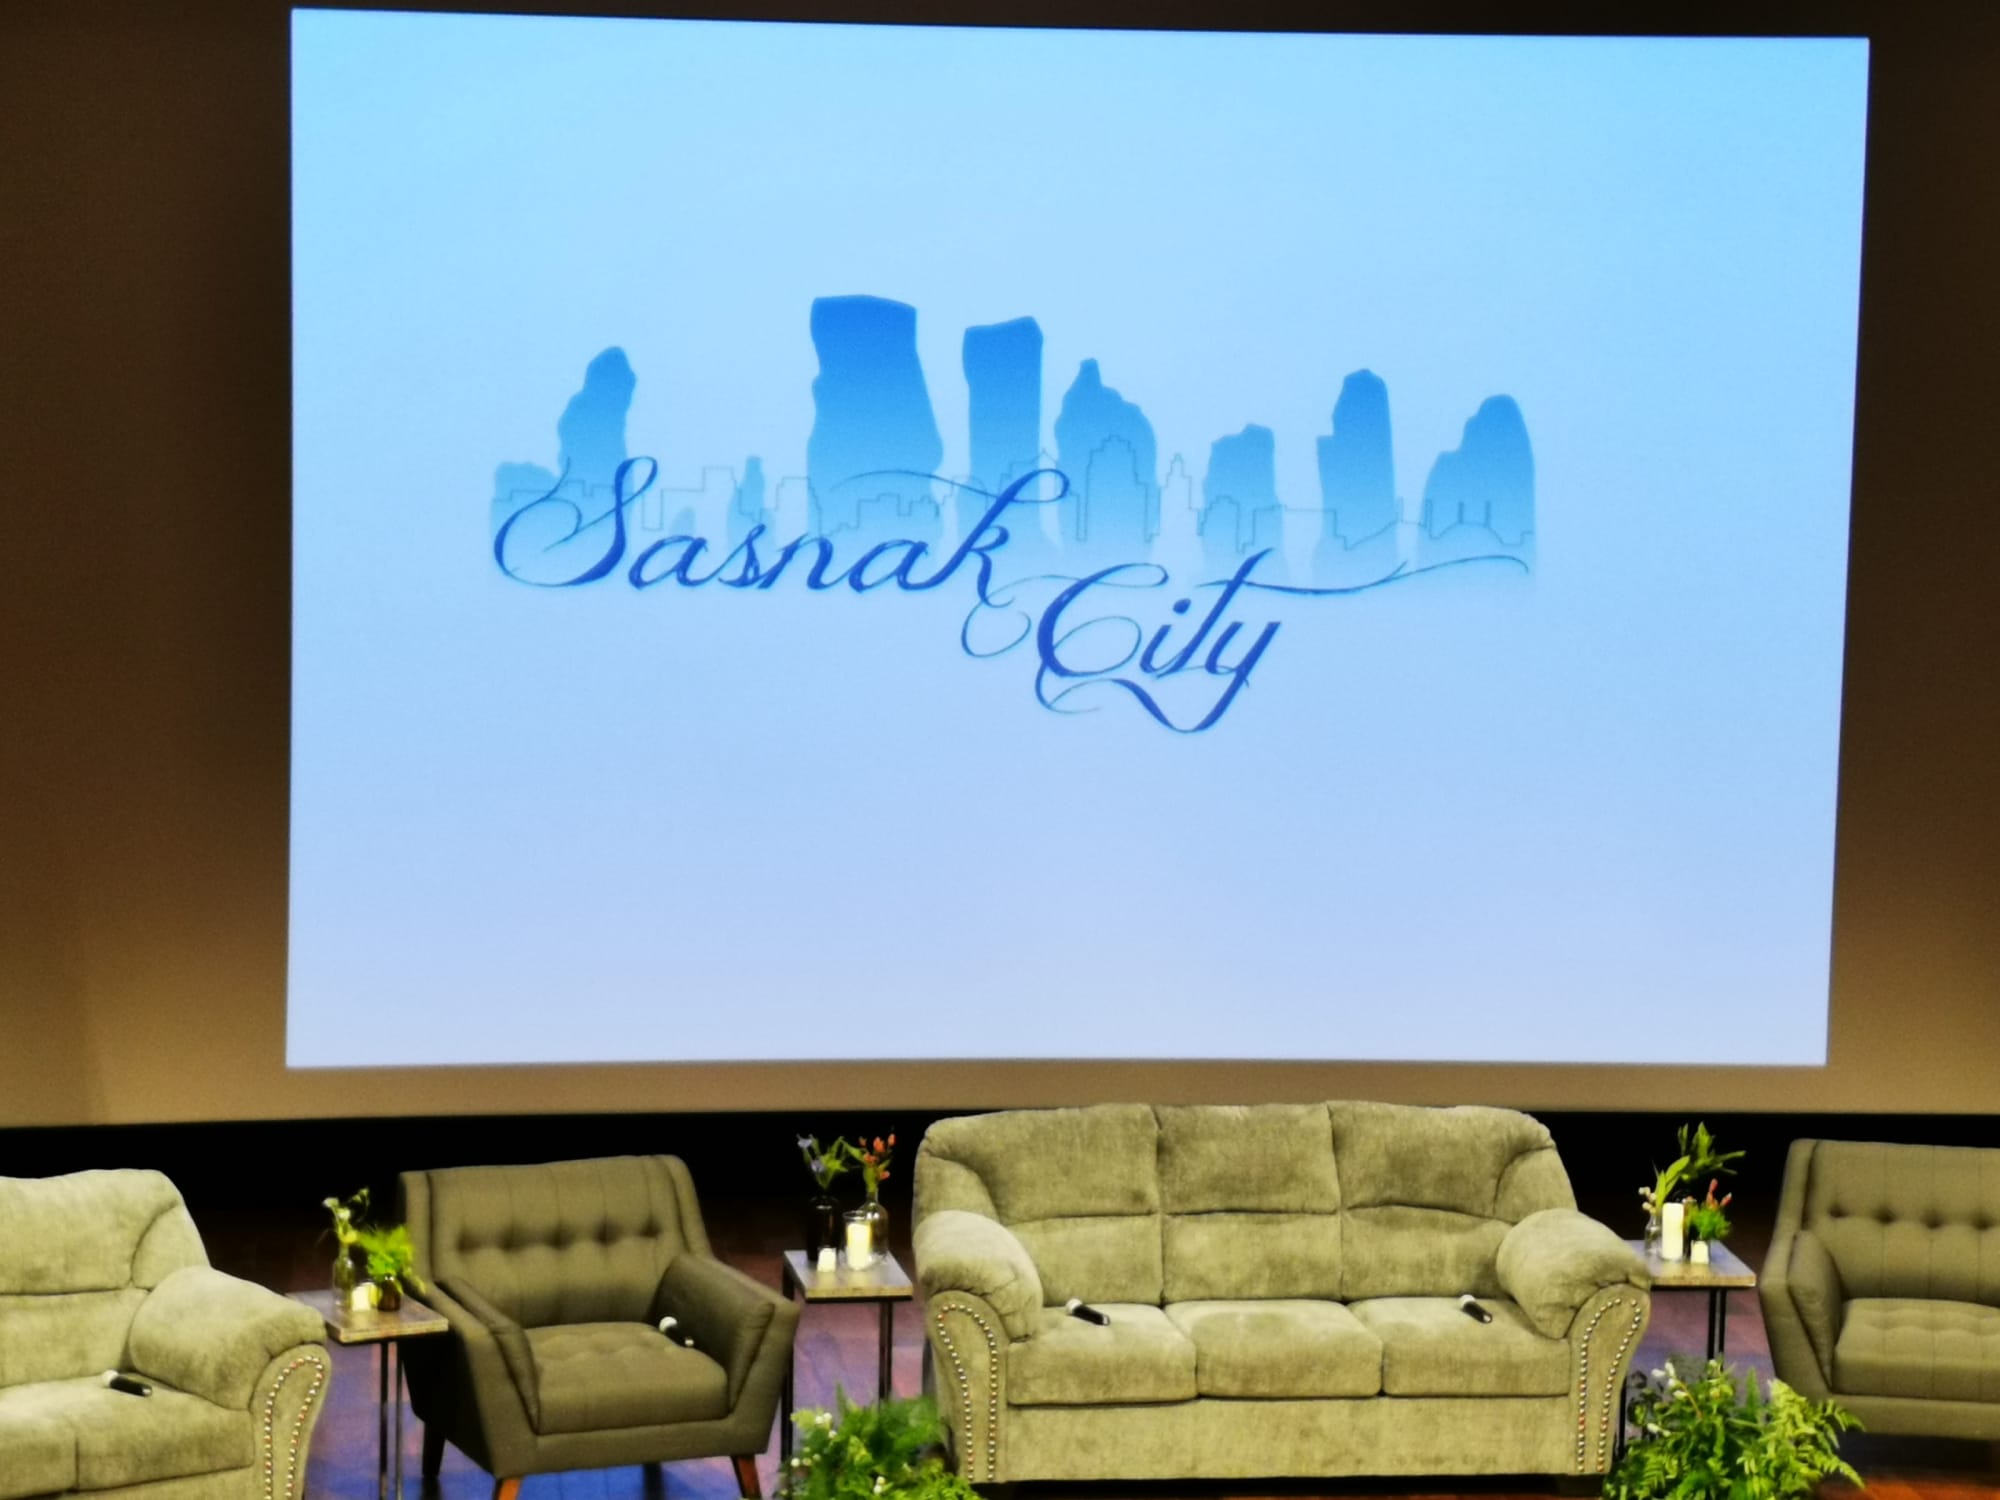 Sasnak City: The Gathering 2023 dates and ticket information